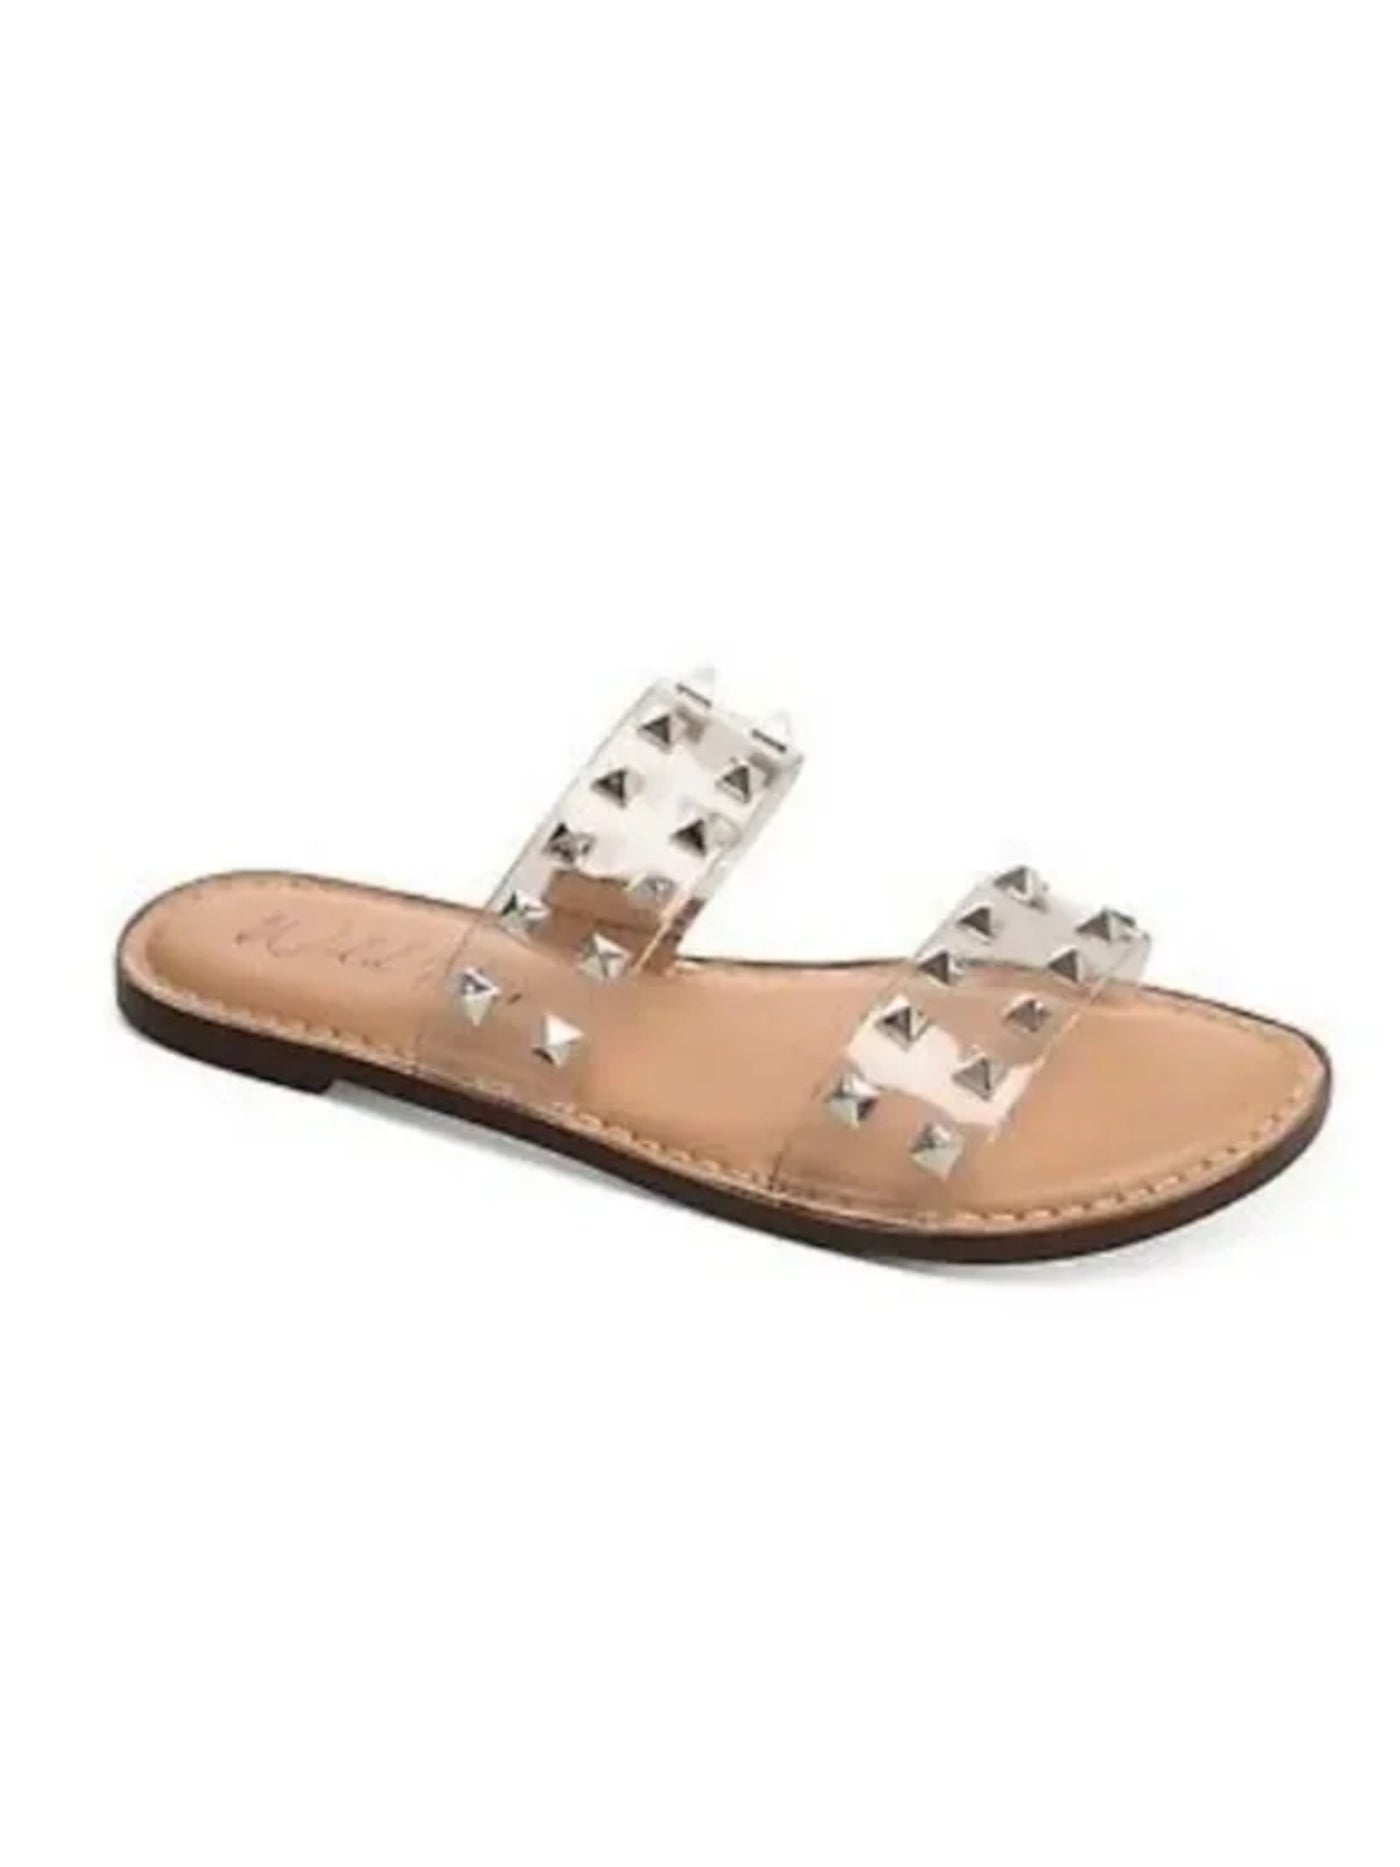 WILD PAIR Womens Beige Double Band Studded Ginniev Round Toe Slip On Slide Sandals Shoes 6.5 M